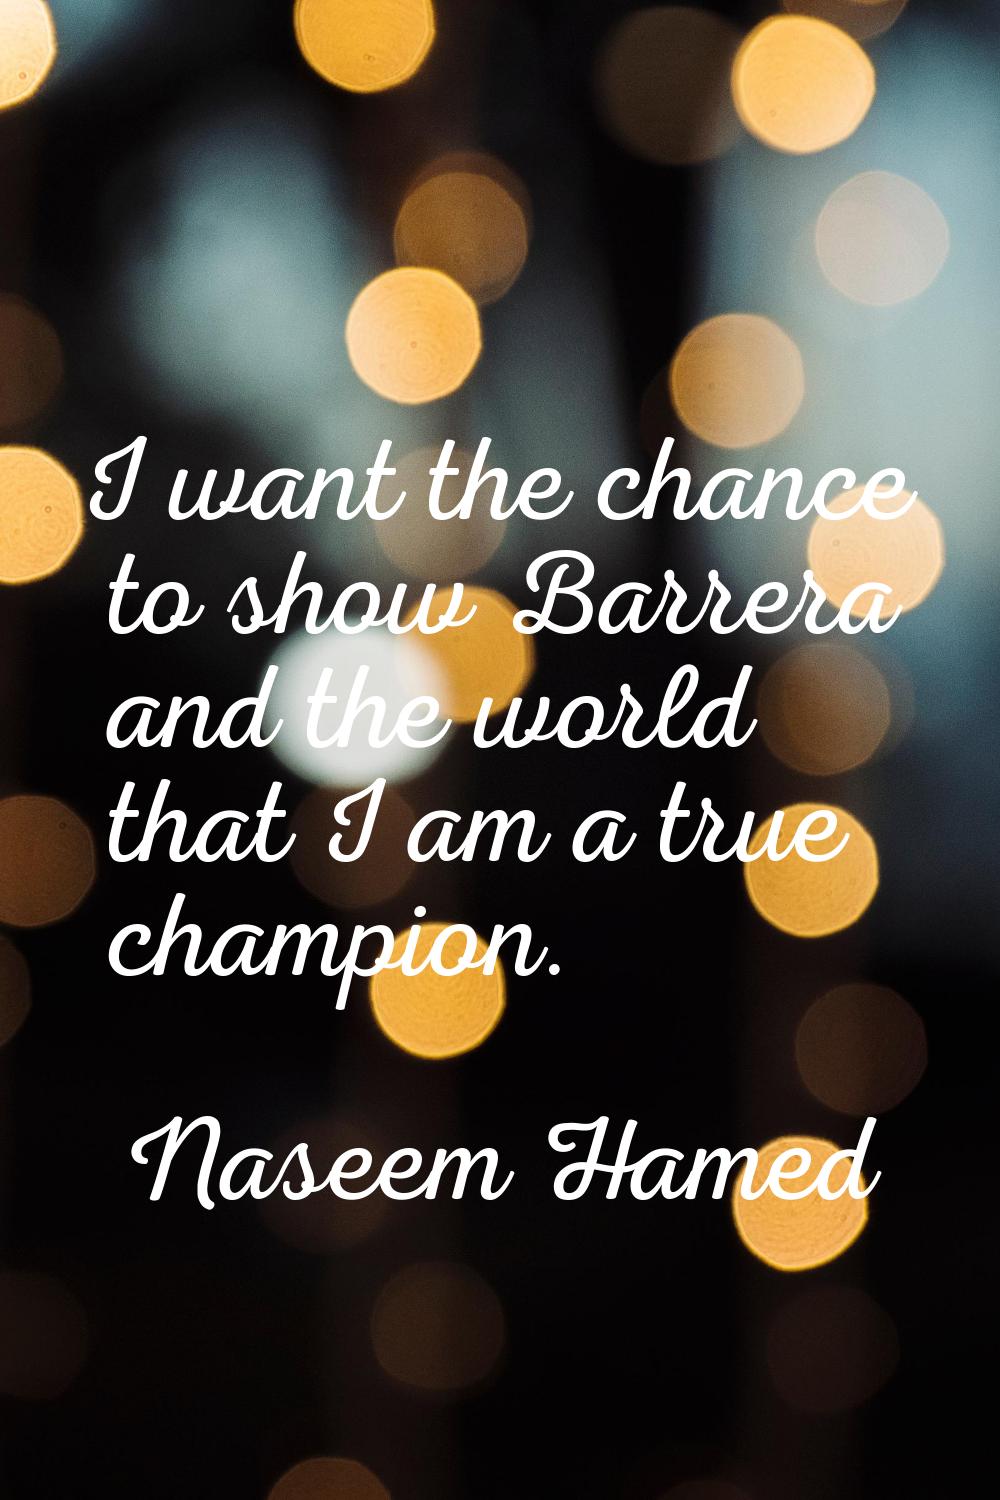 I want the chance to show Barrera and the world that I am a true champion.